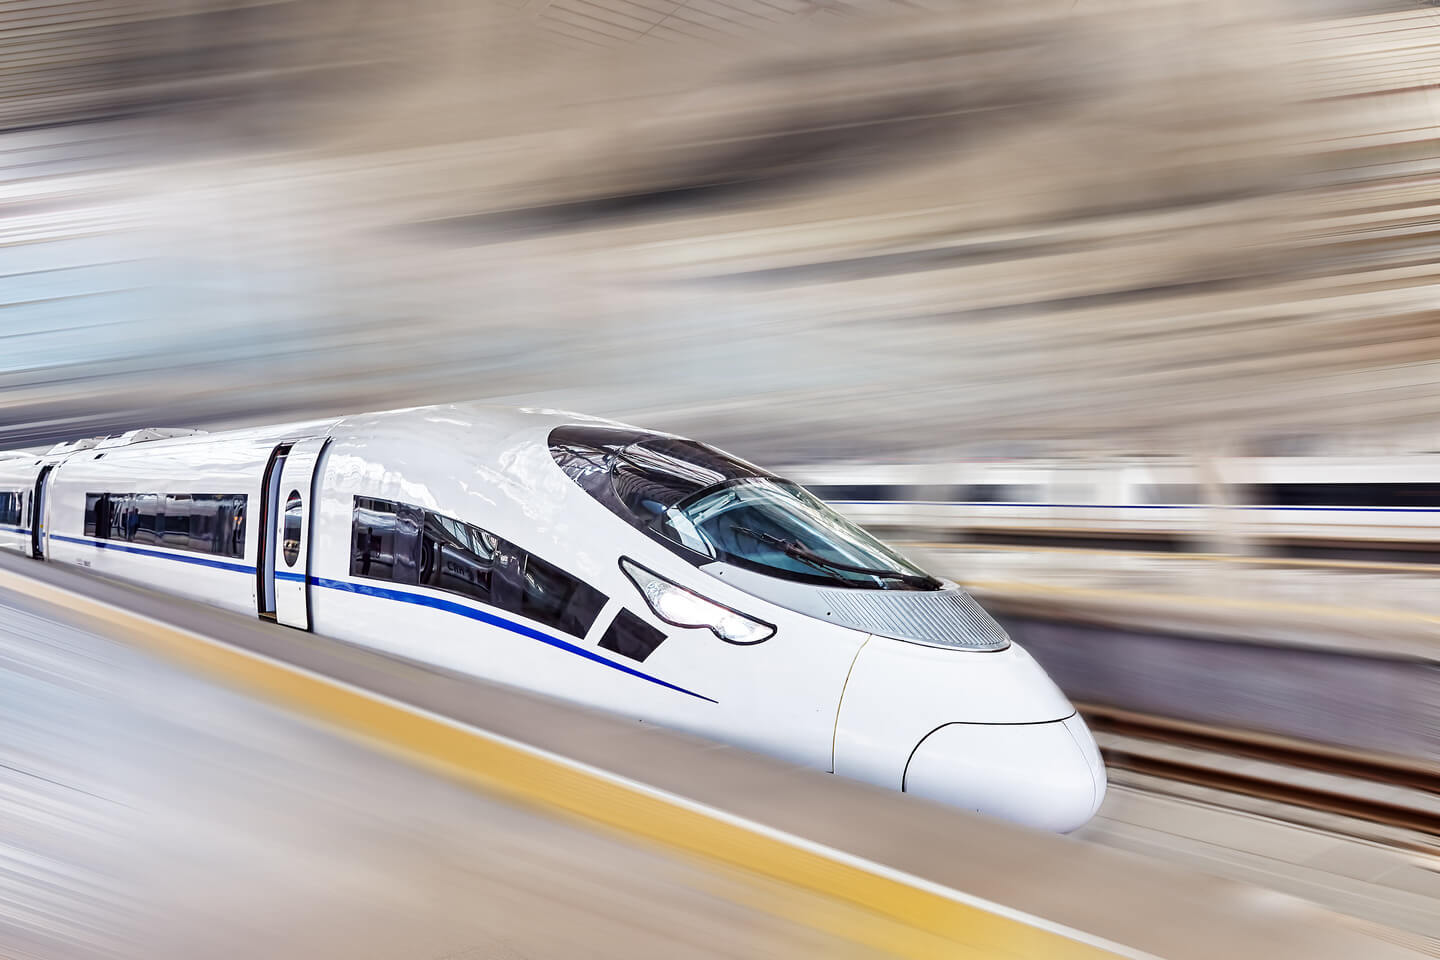 If you're going to have trains, make them like China's high speed rail warriors.